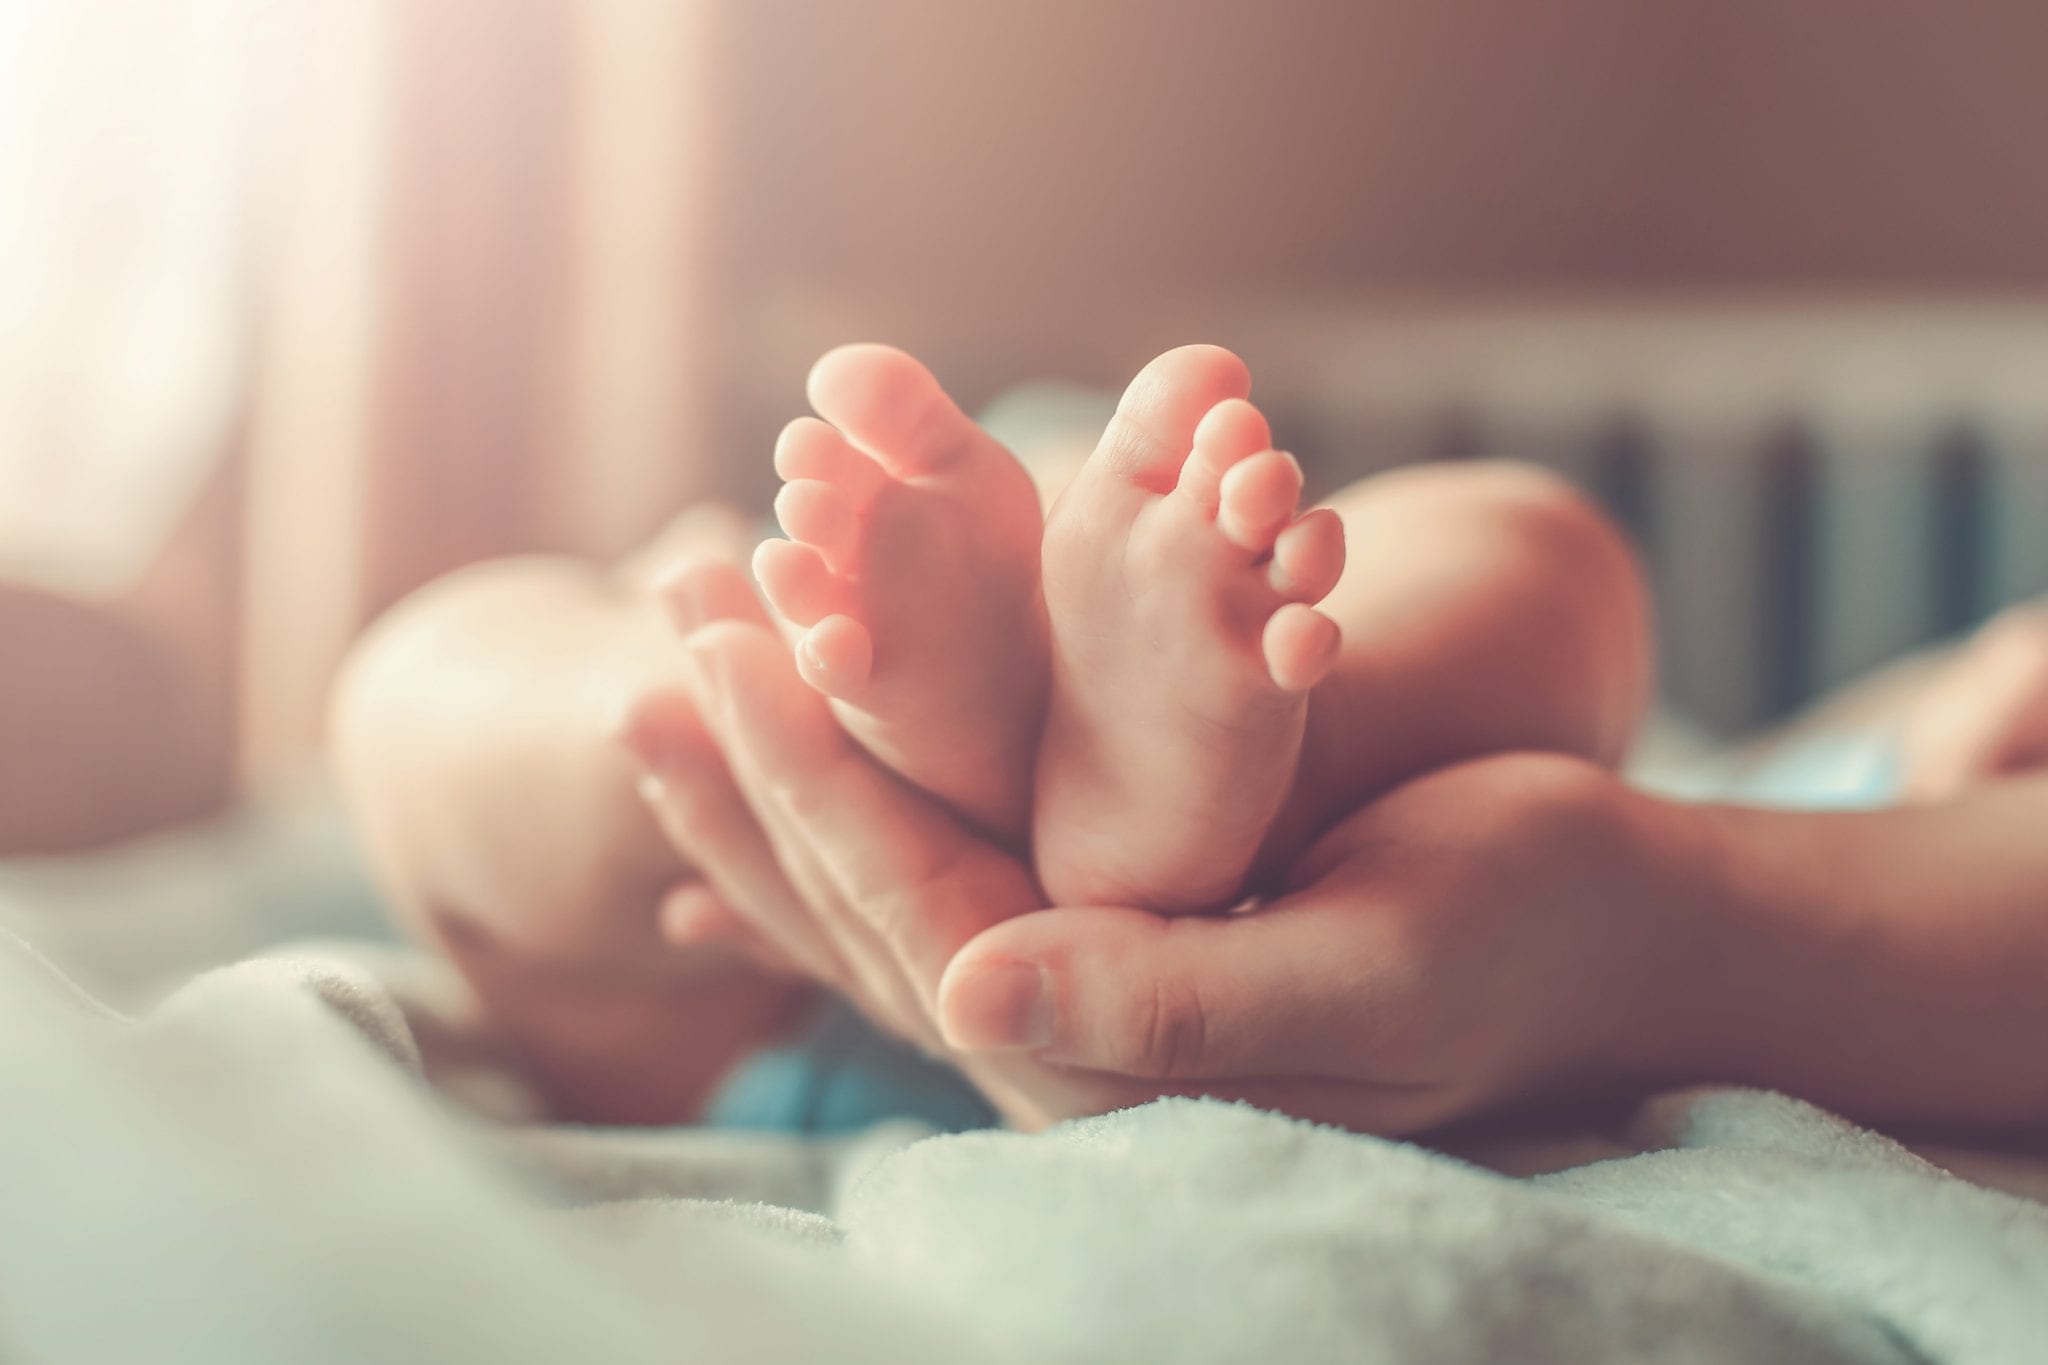 Image of a baby's feet held by a mother's hands